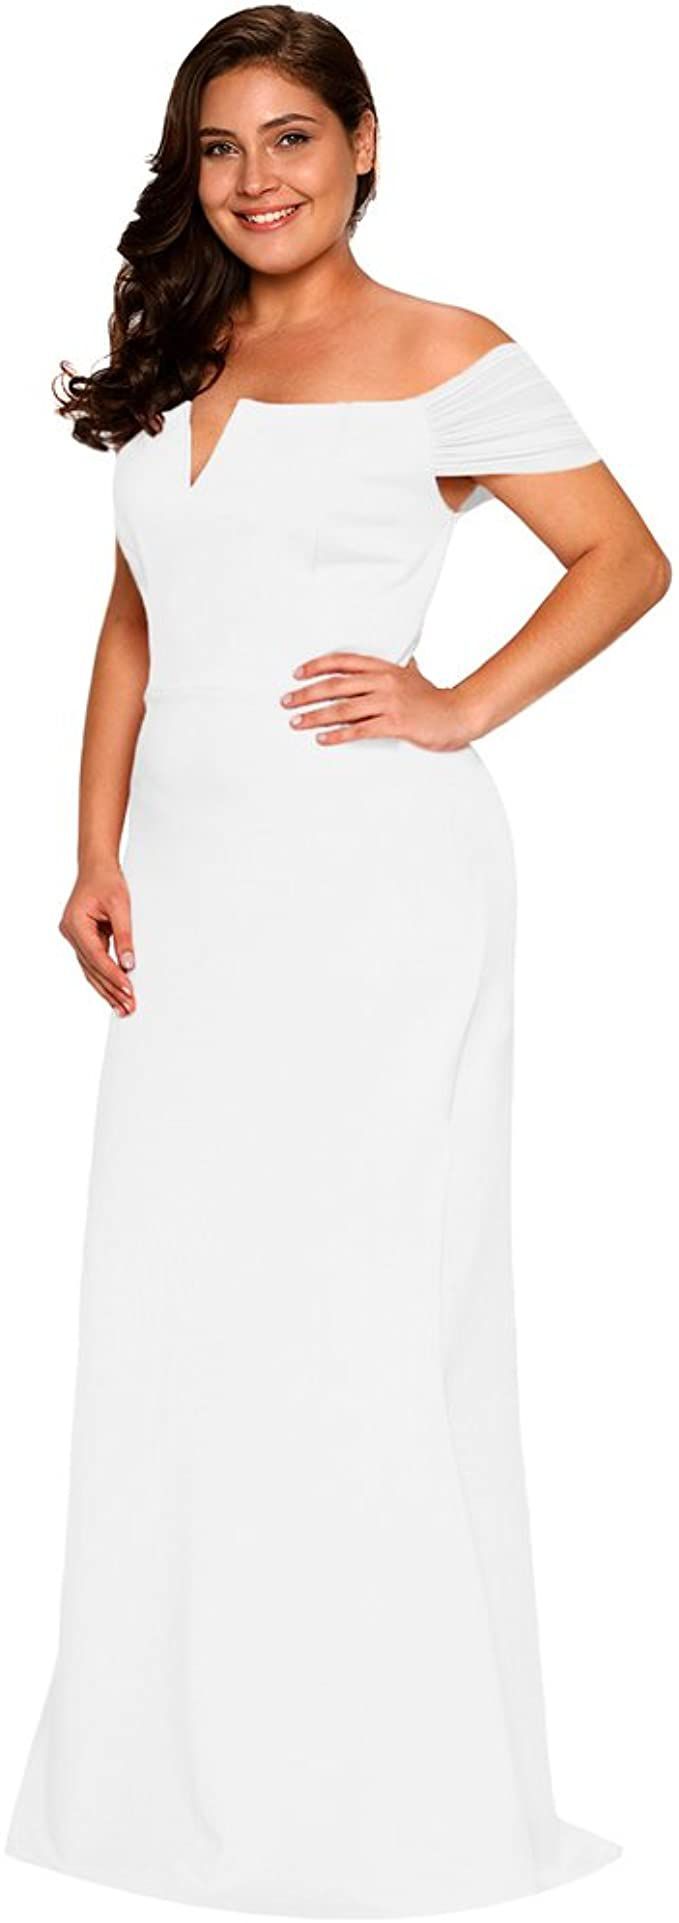 Style B073L9K7WH Lalagen Plus Size 20 Wedding White Mermaid Dress on Queenly